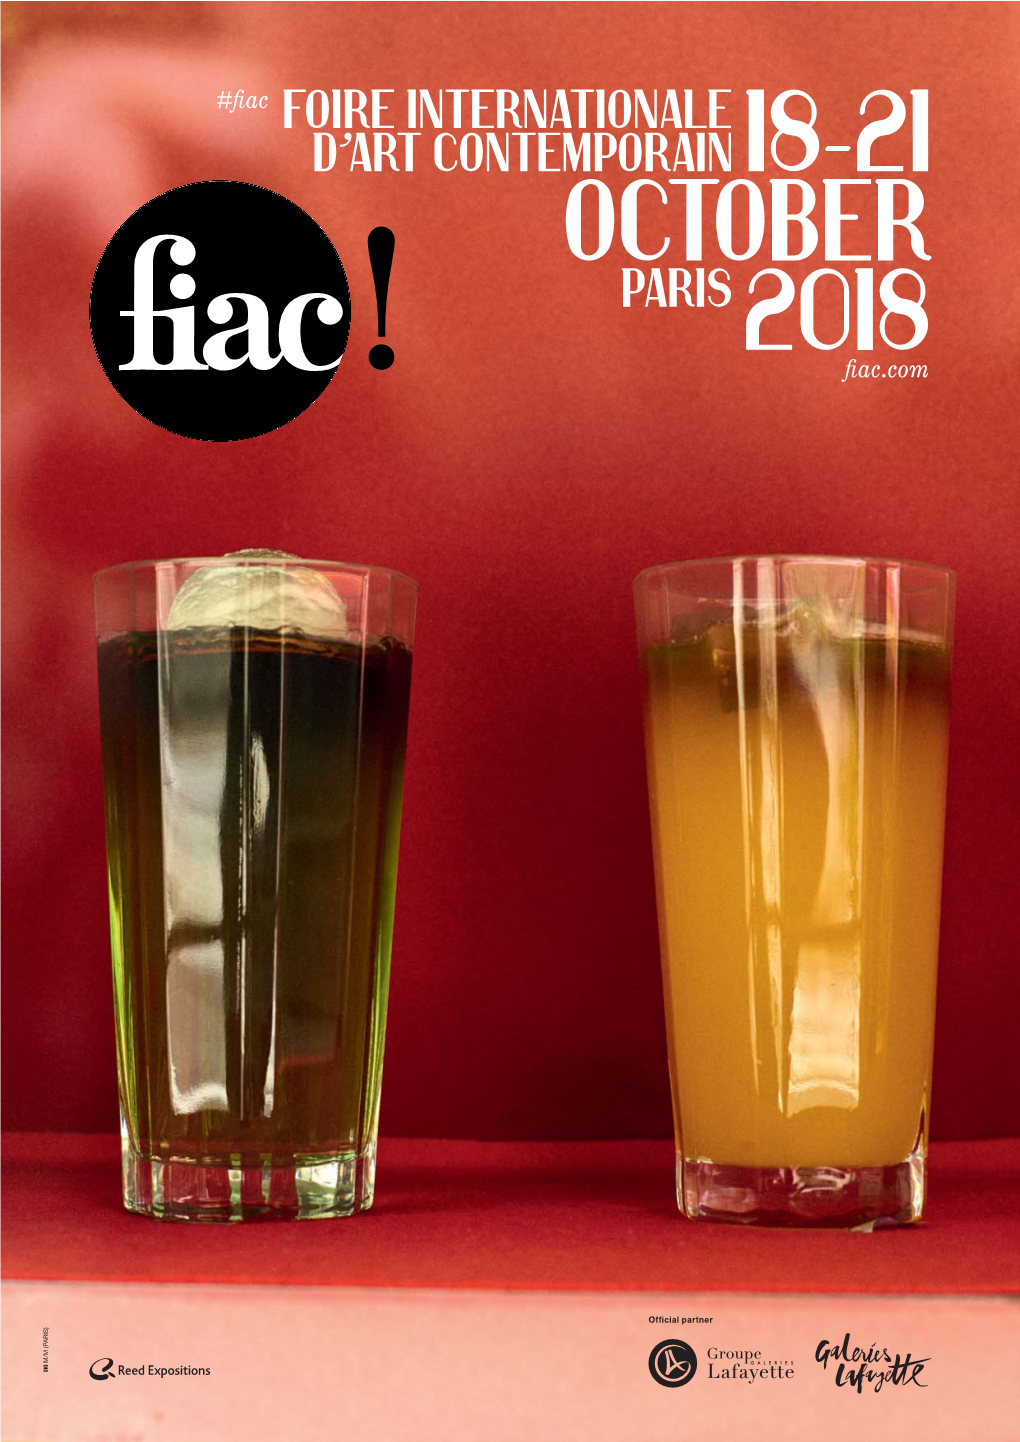 Official Partner, the Galeries Lafayette Group, to Encourage Young Galleries in Their Chosen Path by Providing Financial Support to Facilitate Their Presence at FIAC